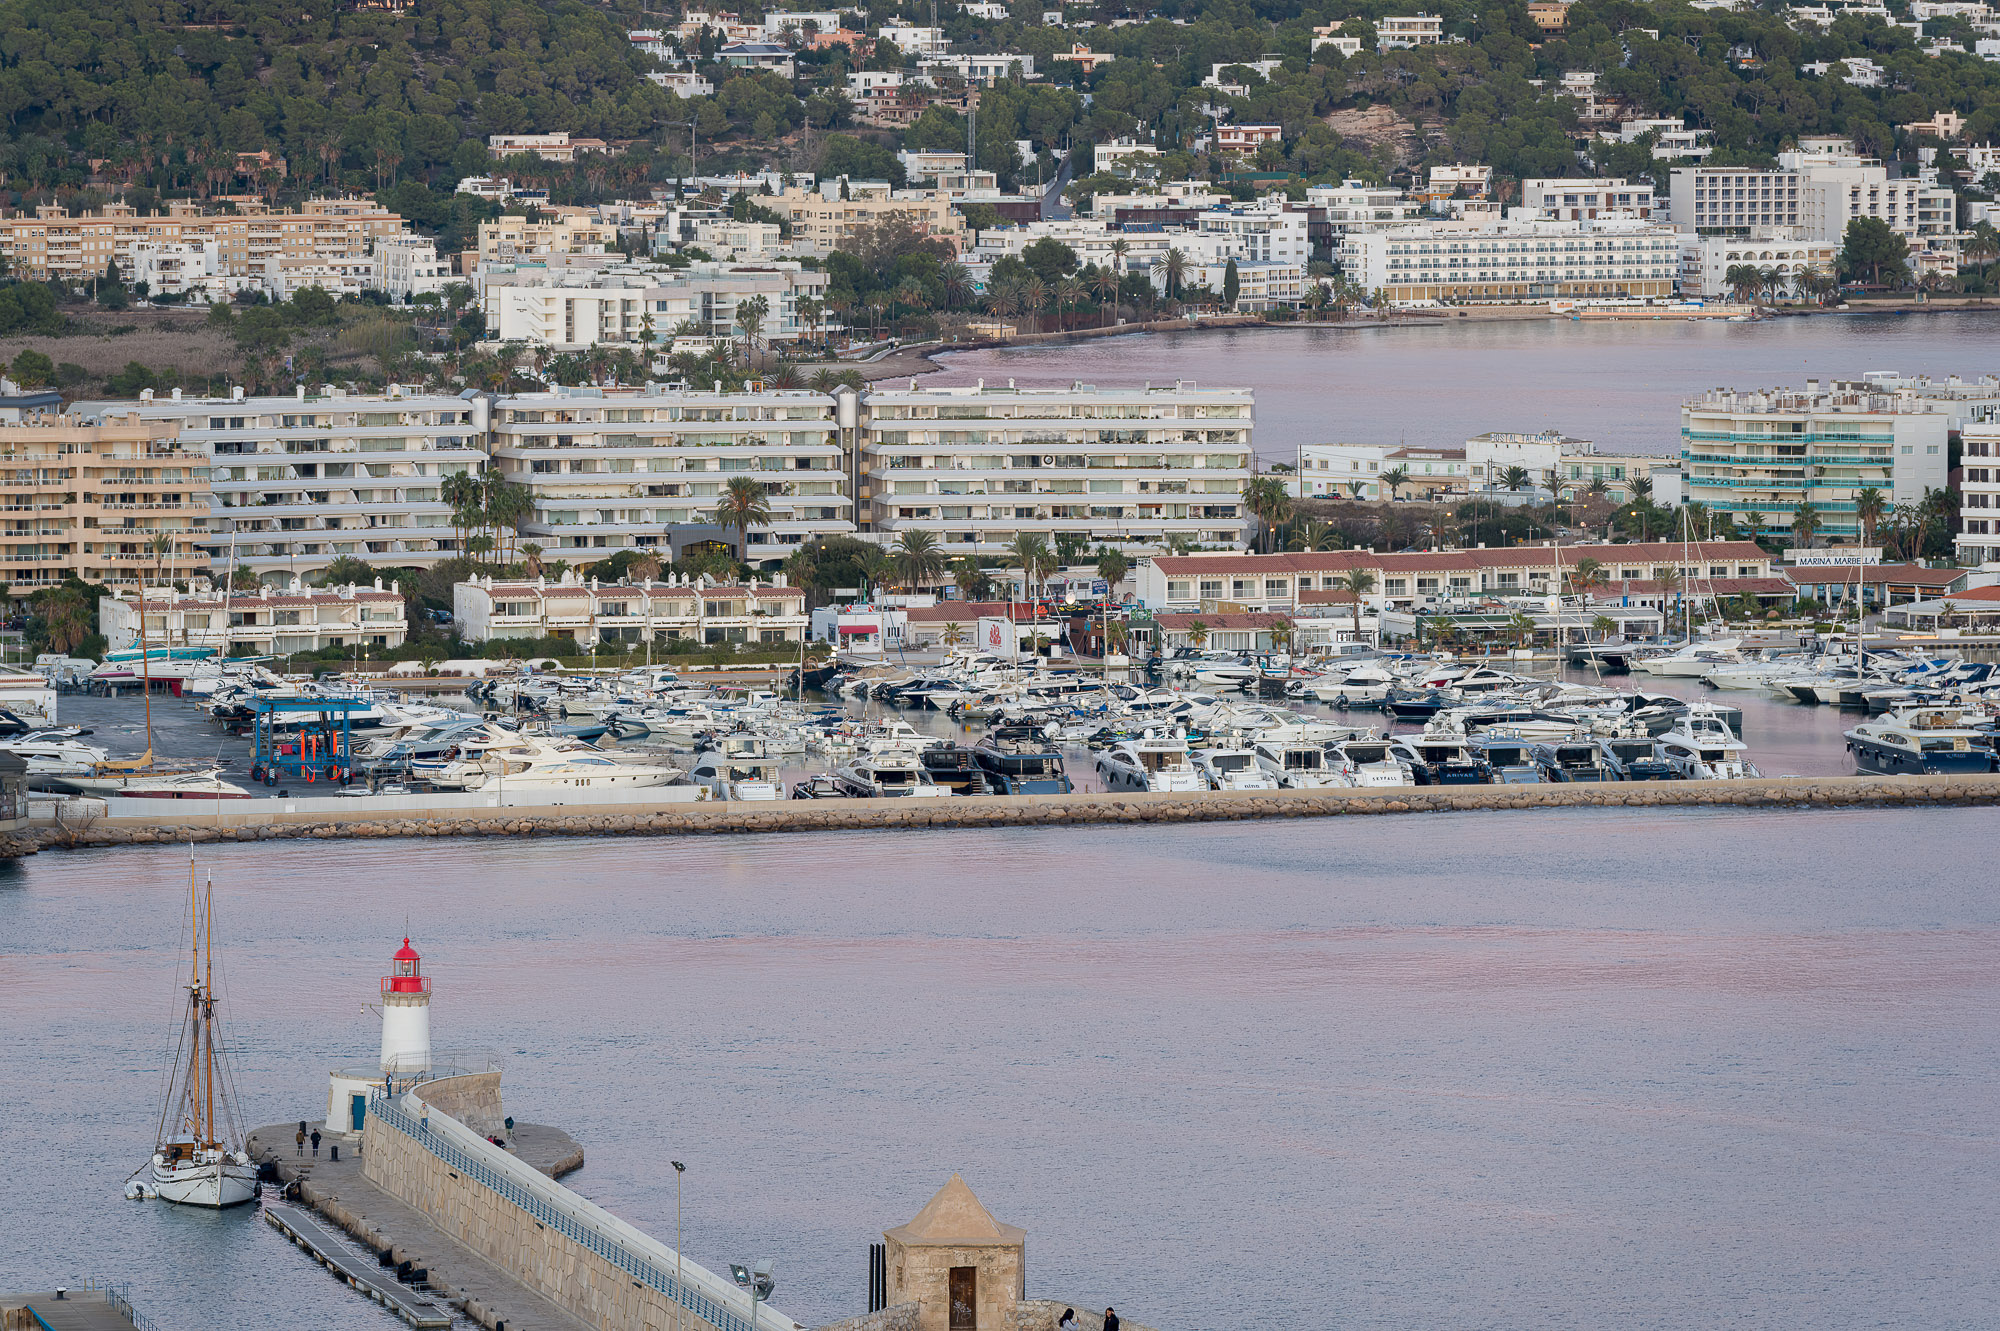 The APB and Ocibar move forward plans to open 100 mooring places in Marina Botafoch in the Port of Eivissa